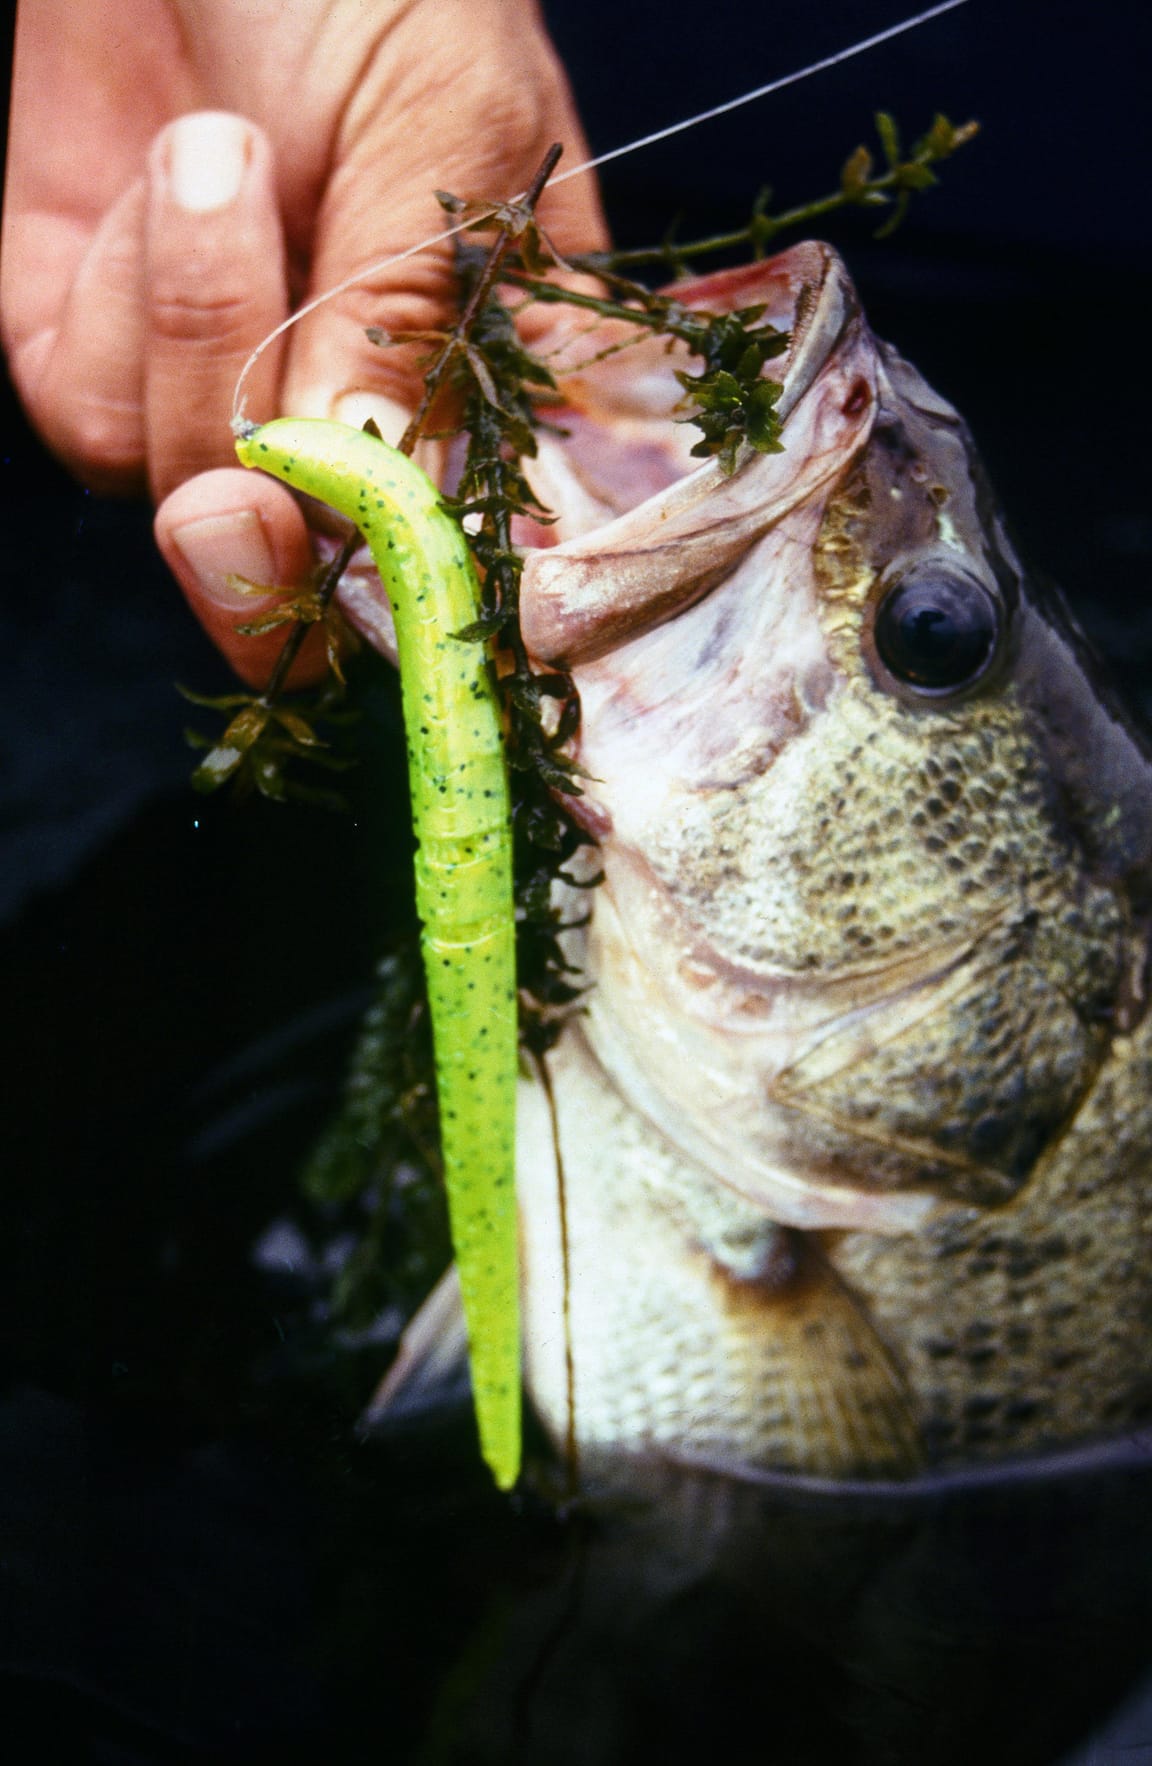 A plastic worm has likely produced more bass than any two other bass lures combined. Don't limit your worm fishing to basic a basic Texas-rig. Worms are versatile. 